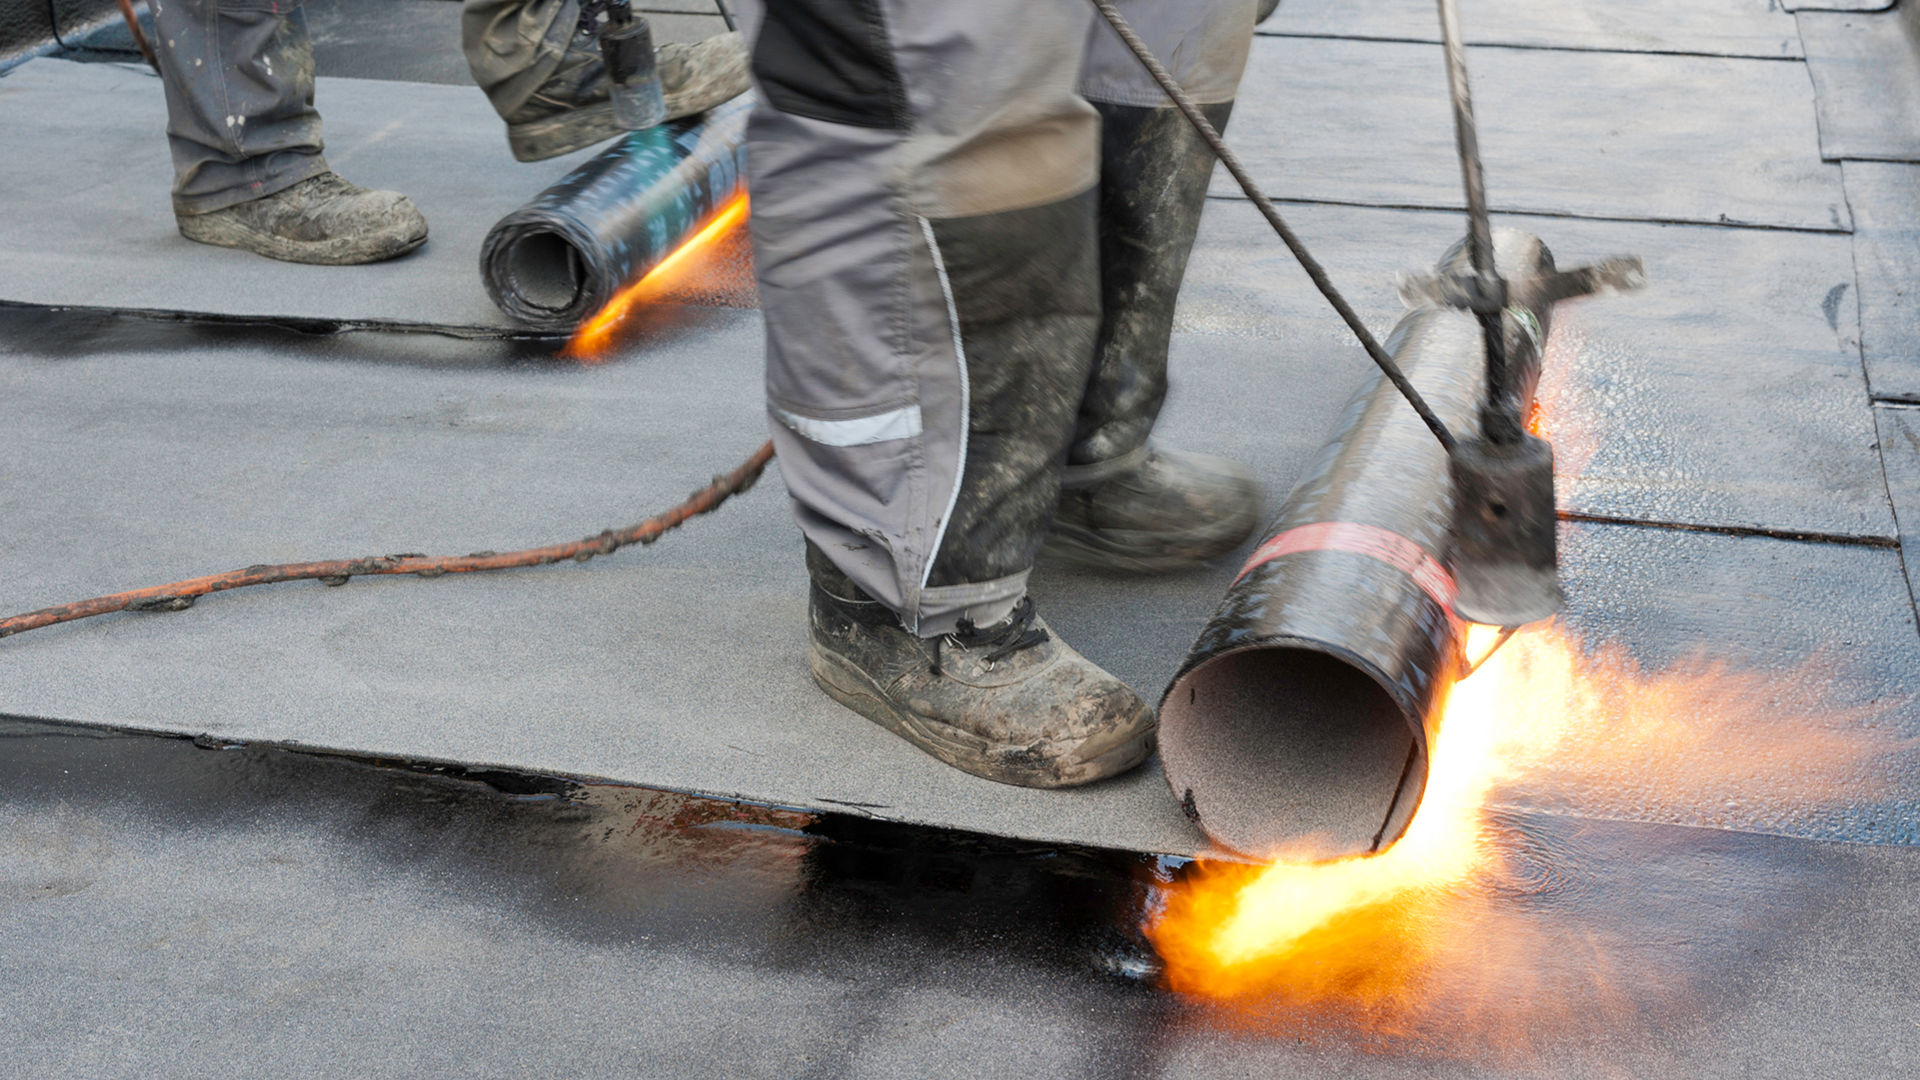 Foot rolling bitumen membrane and applying torch to adhere